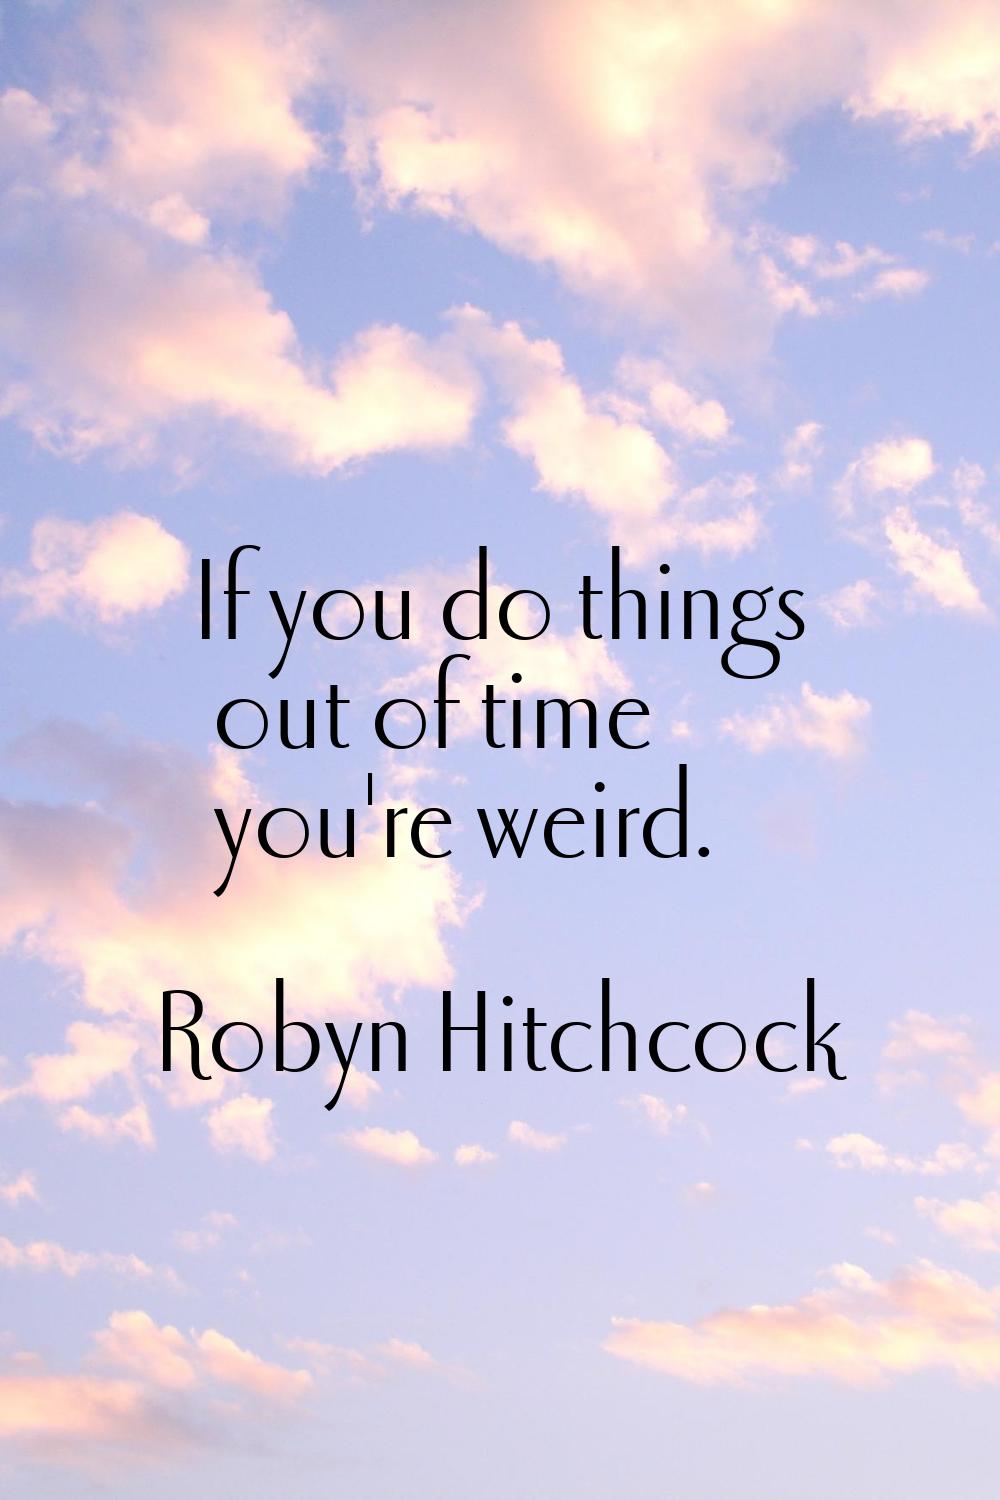 If you do things out of time you're weird.